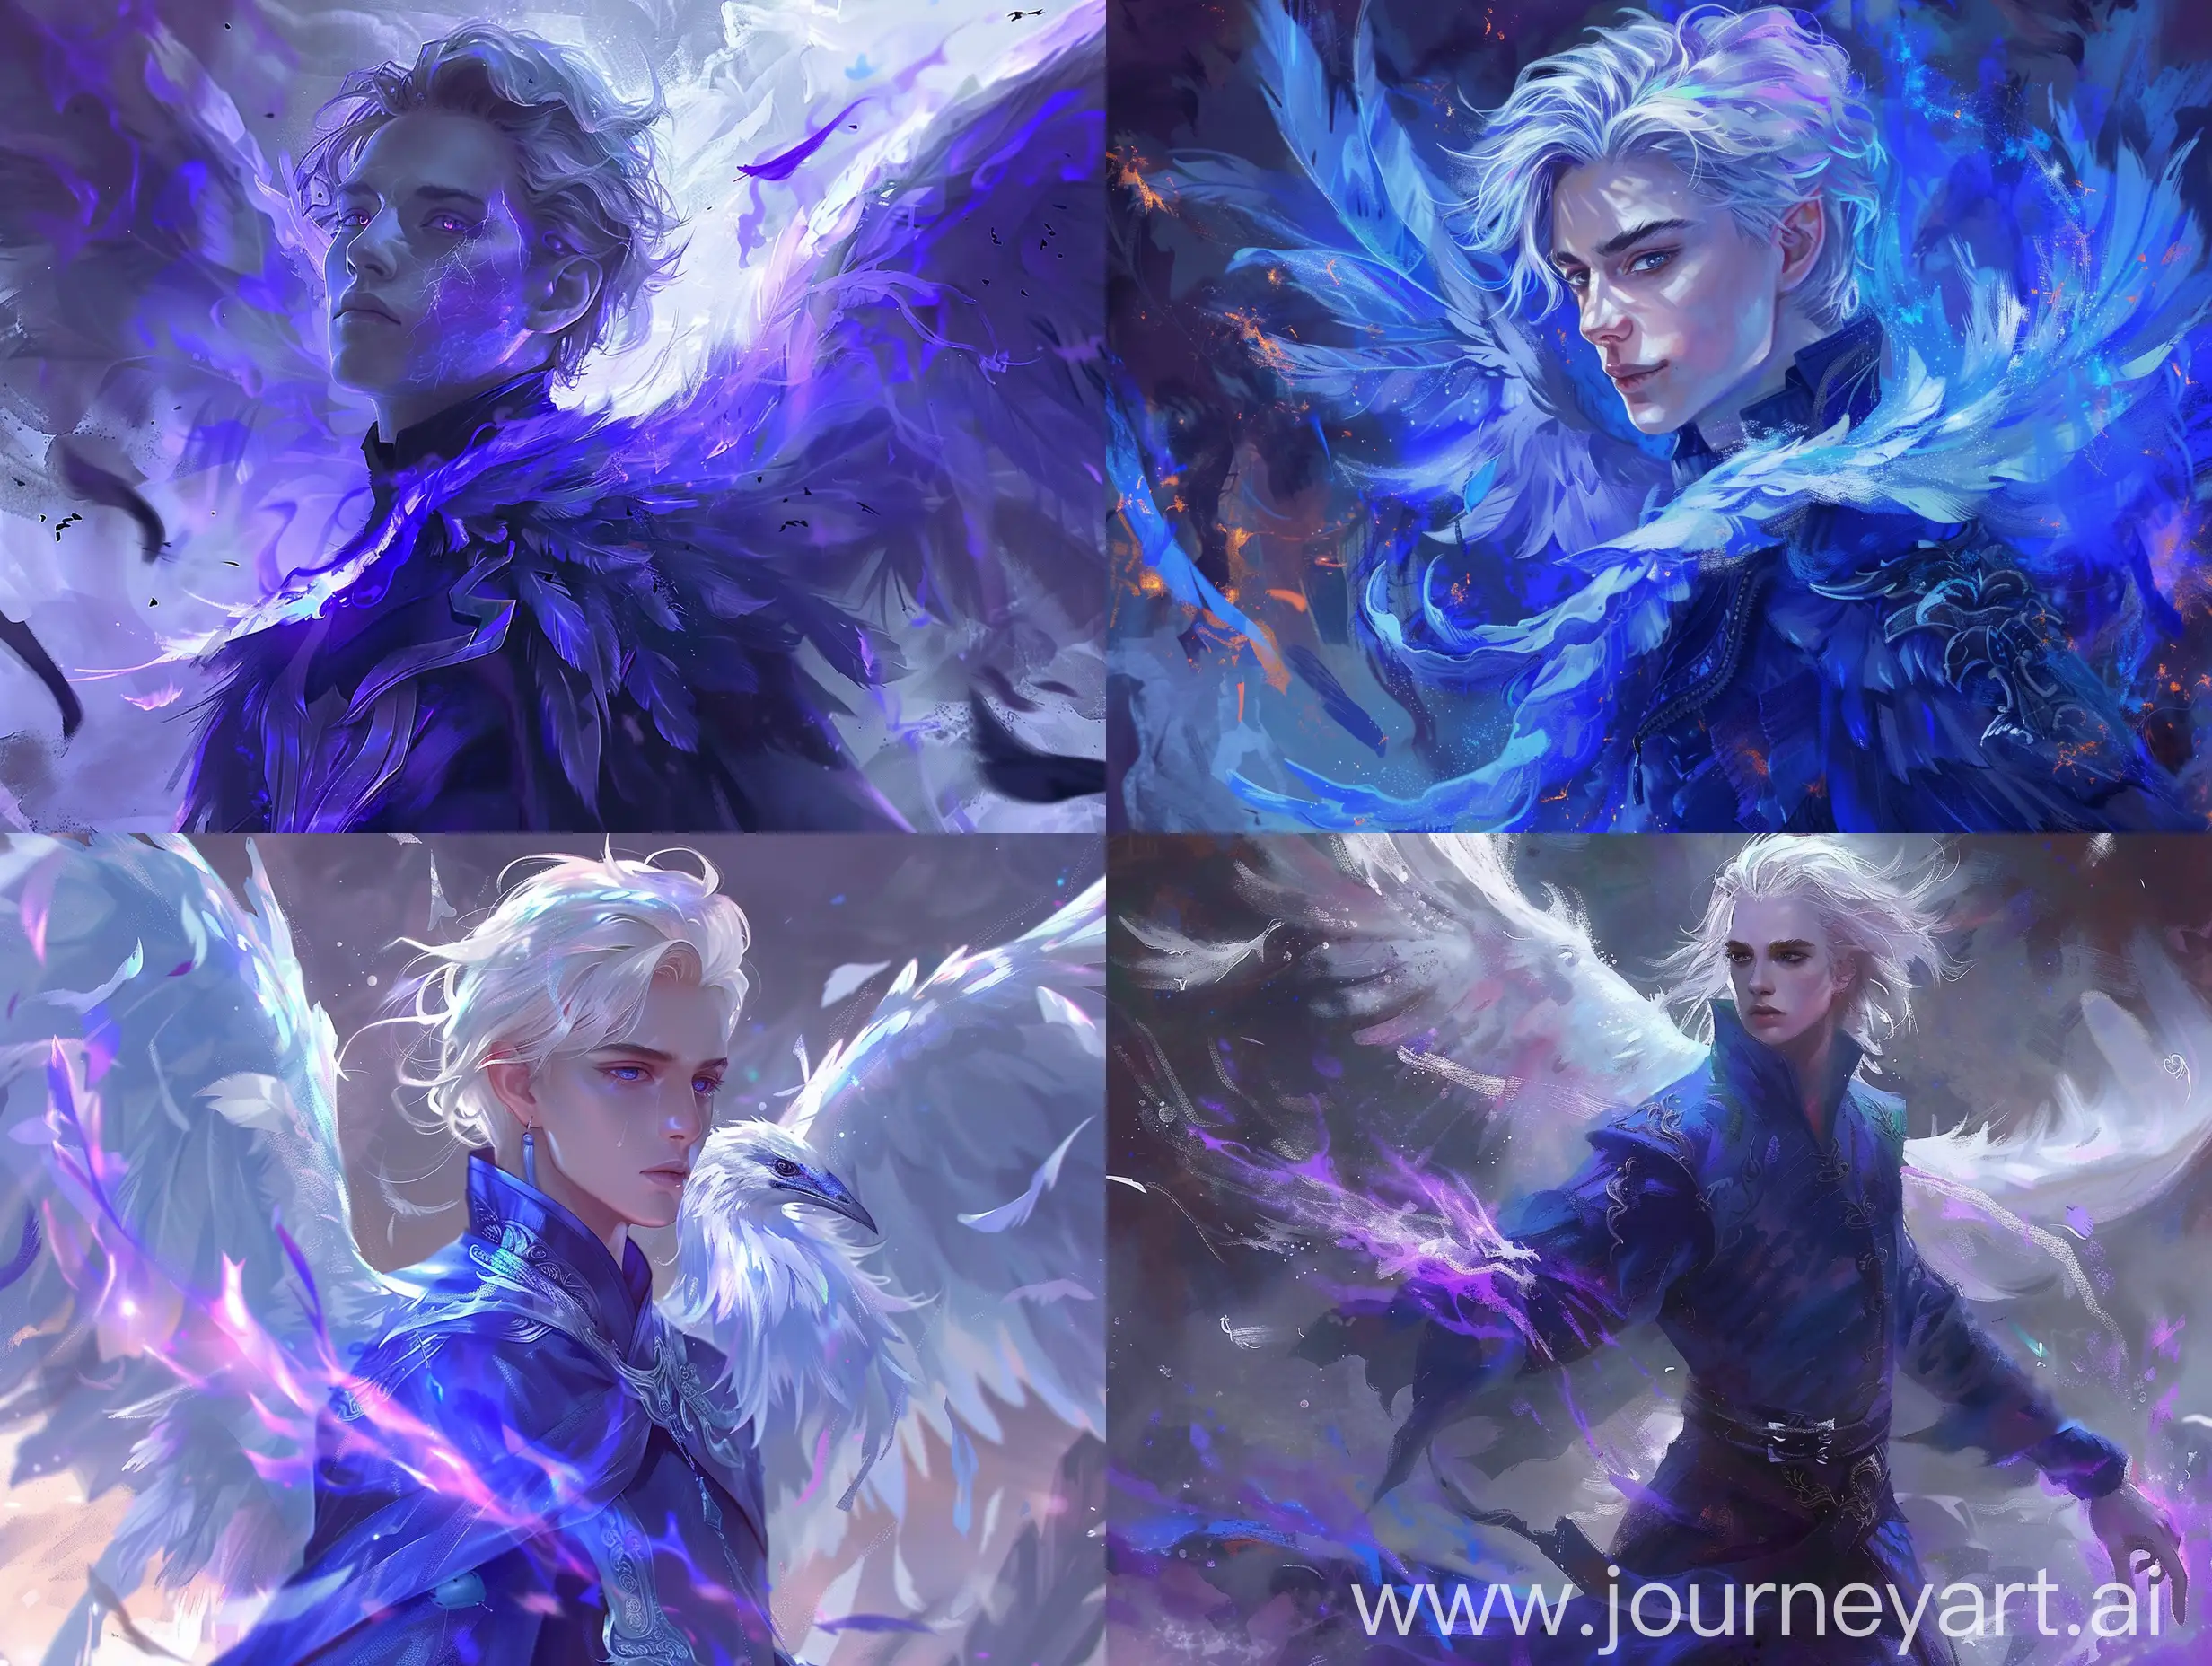 Anime-Art-of-a-Young-White-Male-Inspired-by-Freyr-with-Mythic-Phoenix-and-Purple-Aura